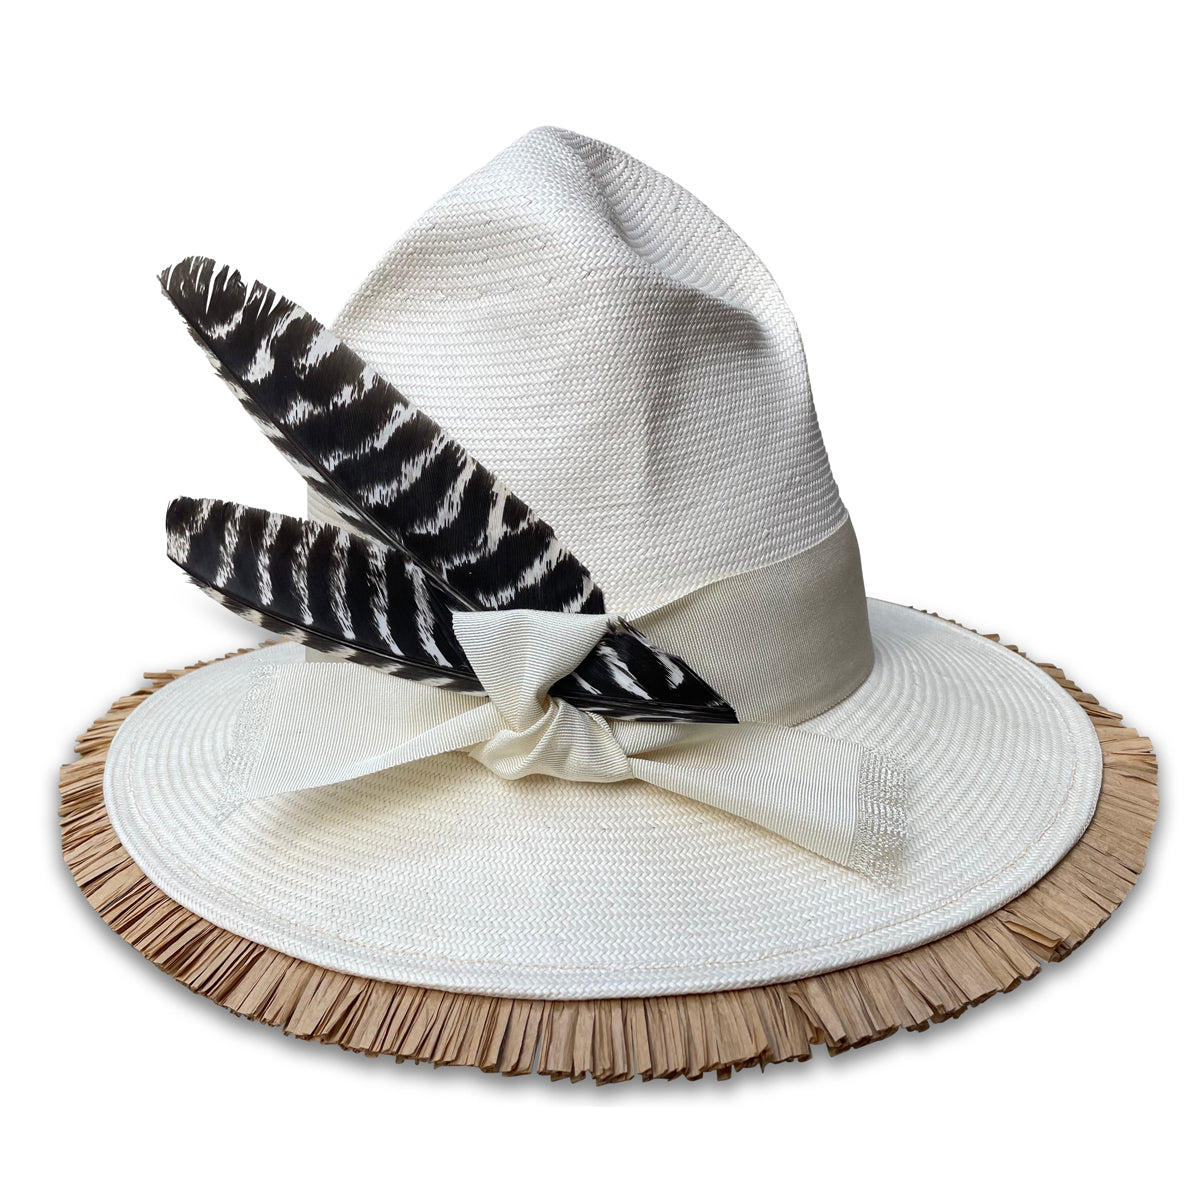 Ms Parker Shantung Straw Hat from Cha Cha's House of Ill Repute Kentucky Derby Hat Collection